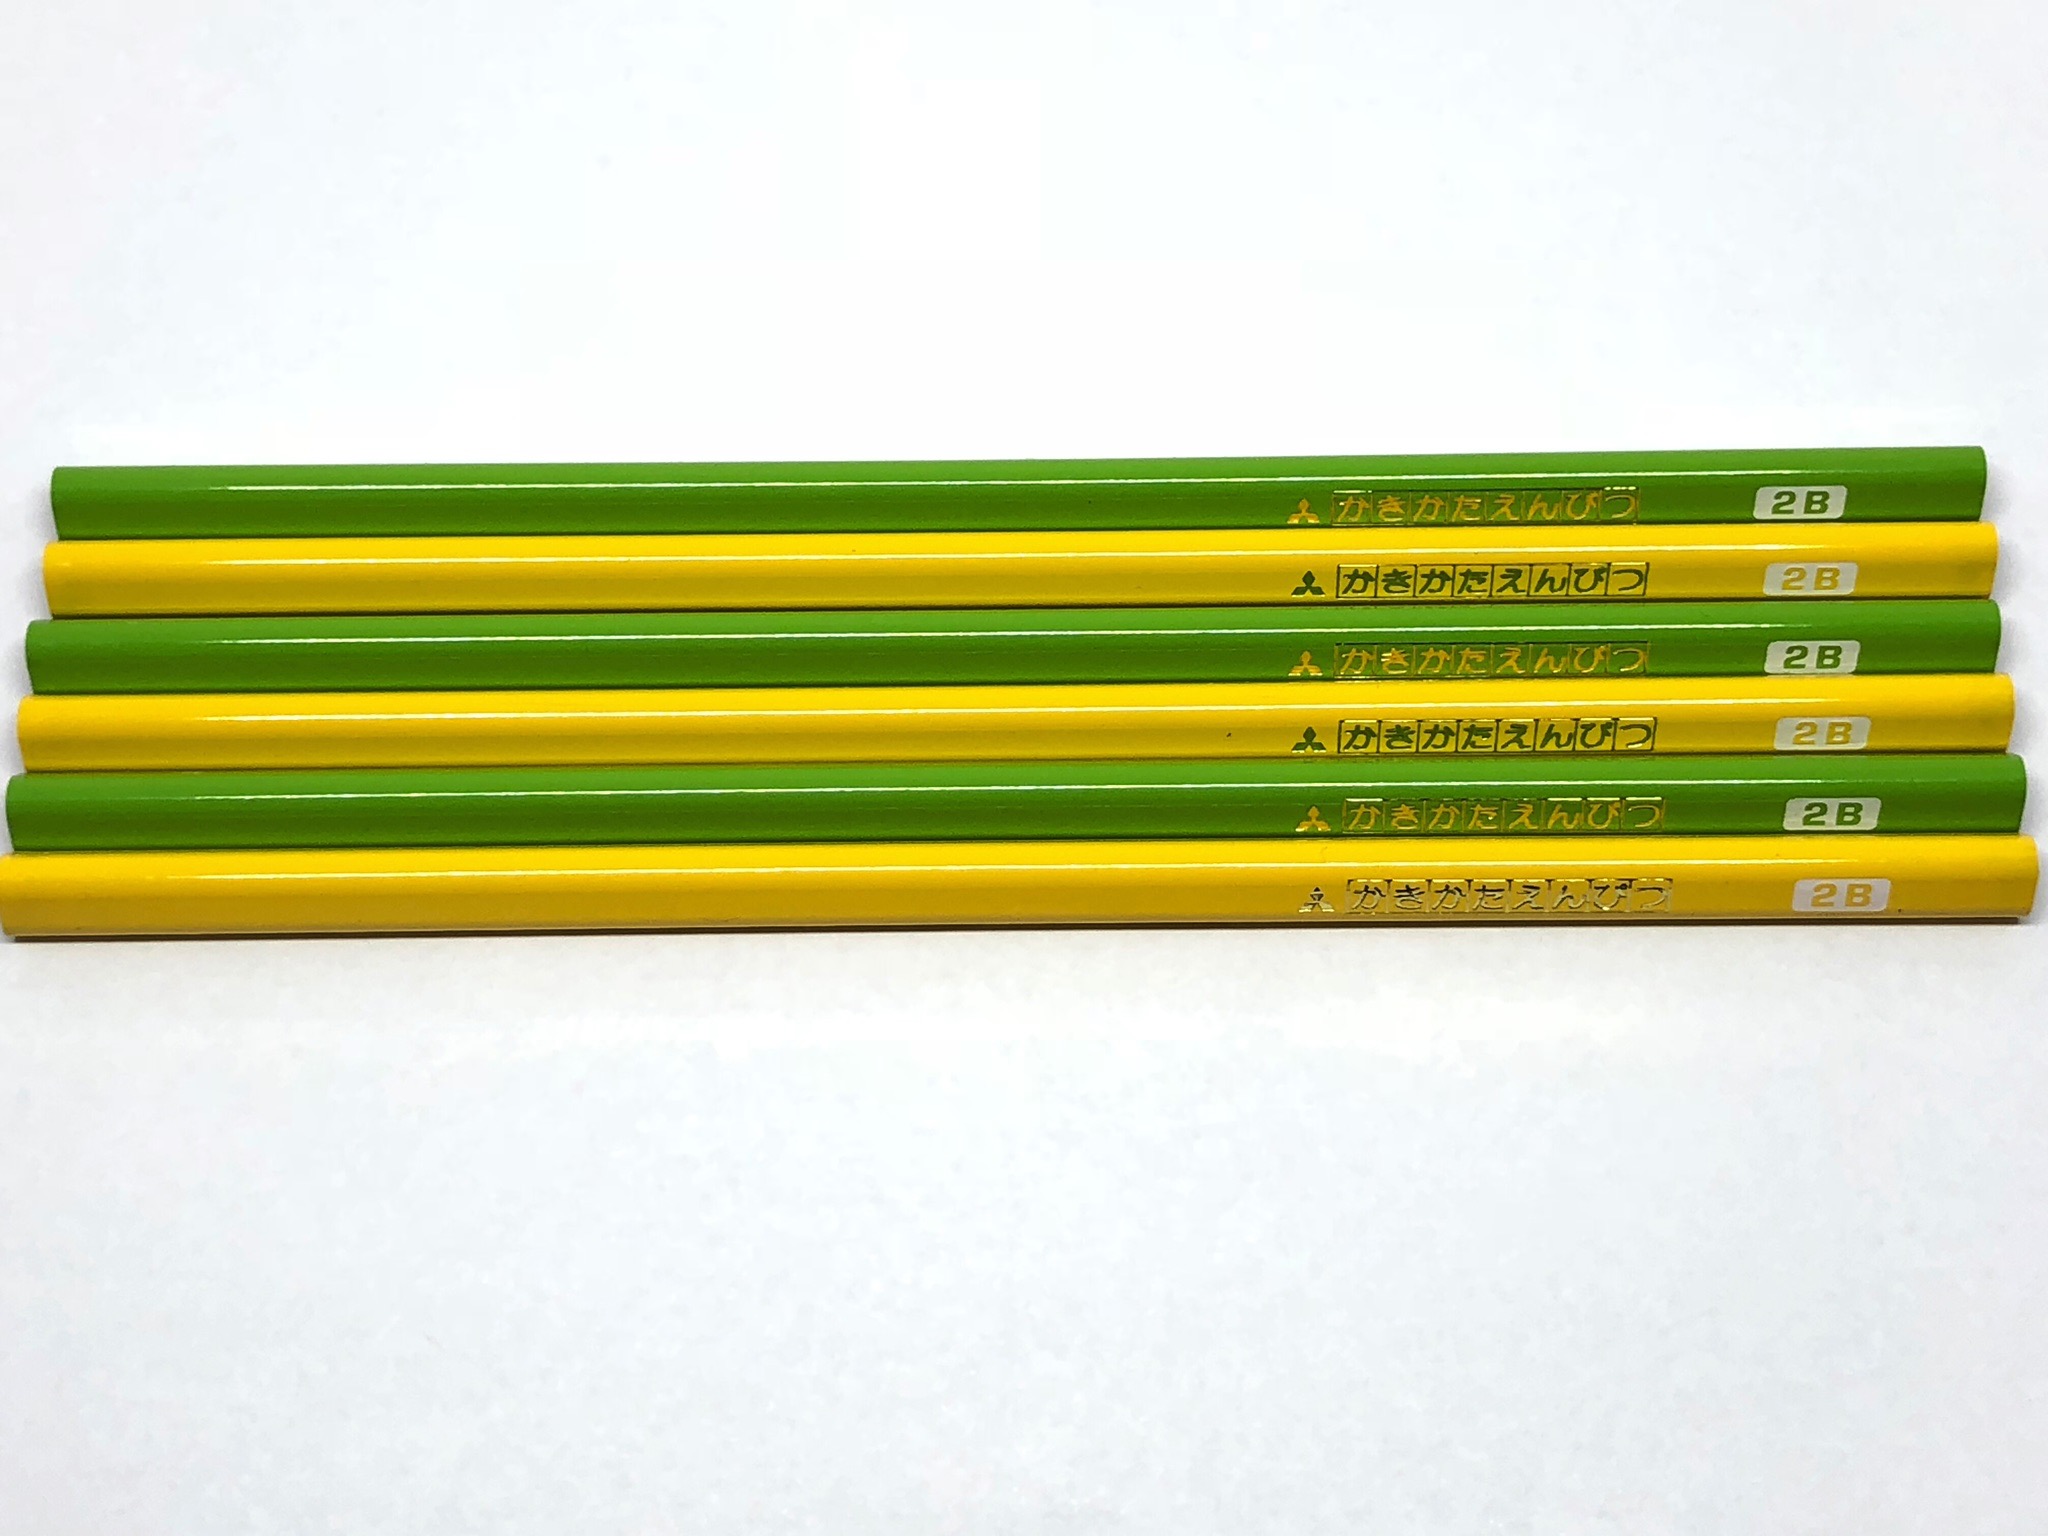 Mitsubishi Triangular Writing Pencils 4563 Yellow-green 2b Do 87050 fromJAPAN for sale online 